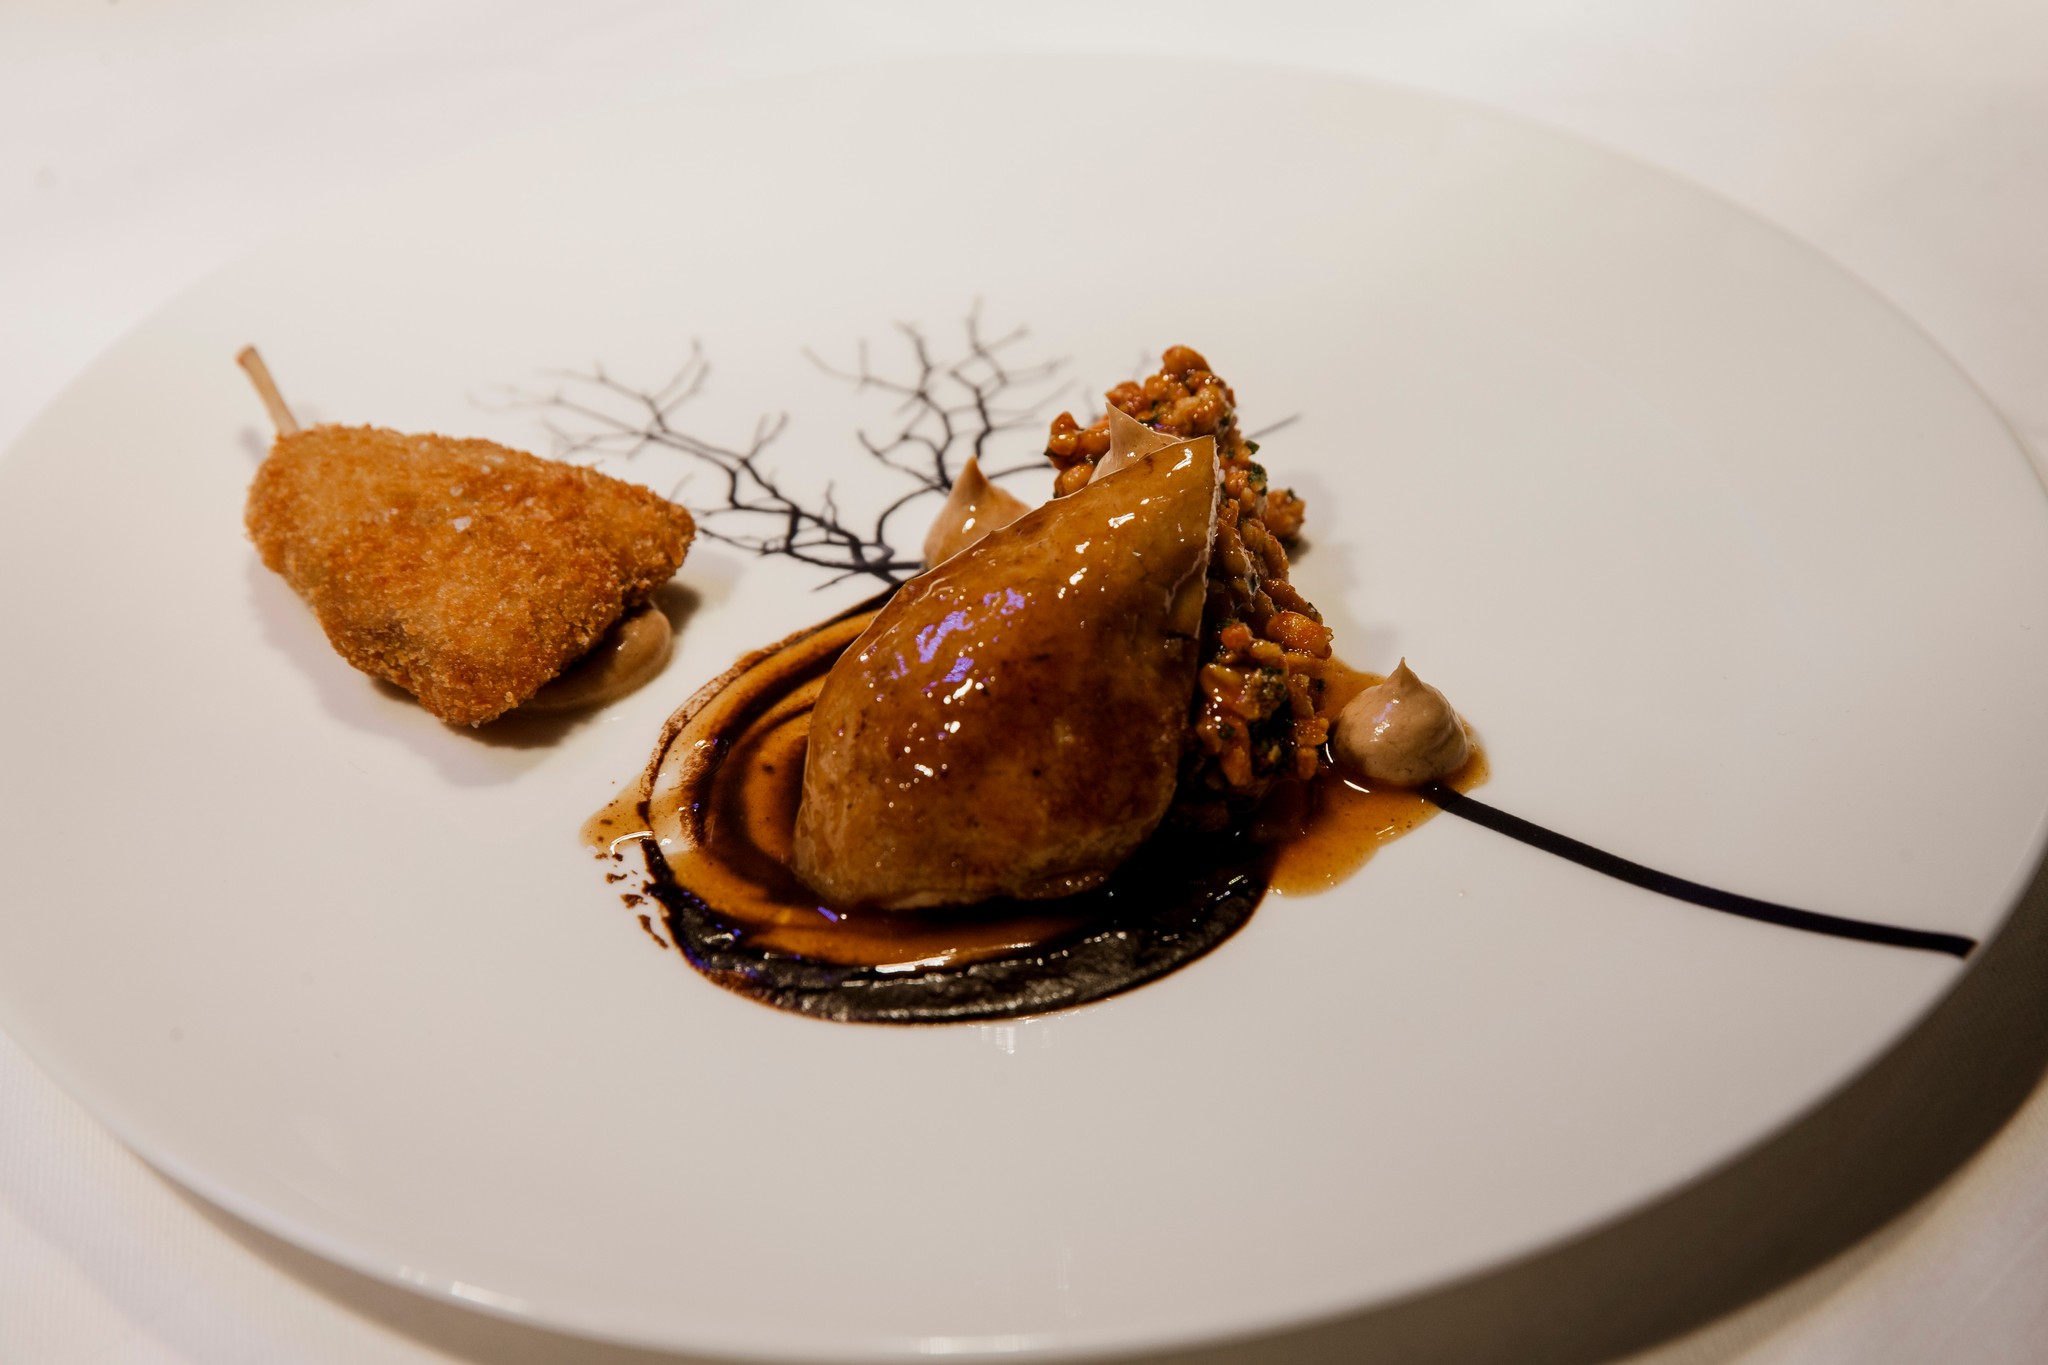 Roast and Marinated Breast of Quail Crispy Leg, Carrot & Rosehip, Black Garlic and pine nut from Marcus Wareing's menu at Signature Food Festival 